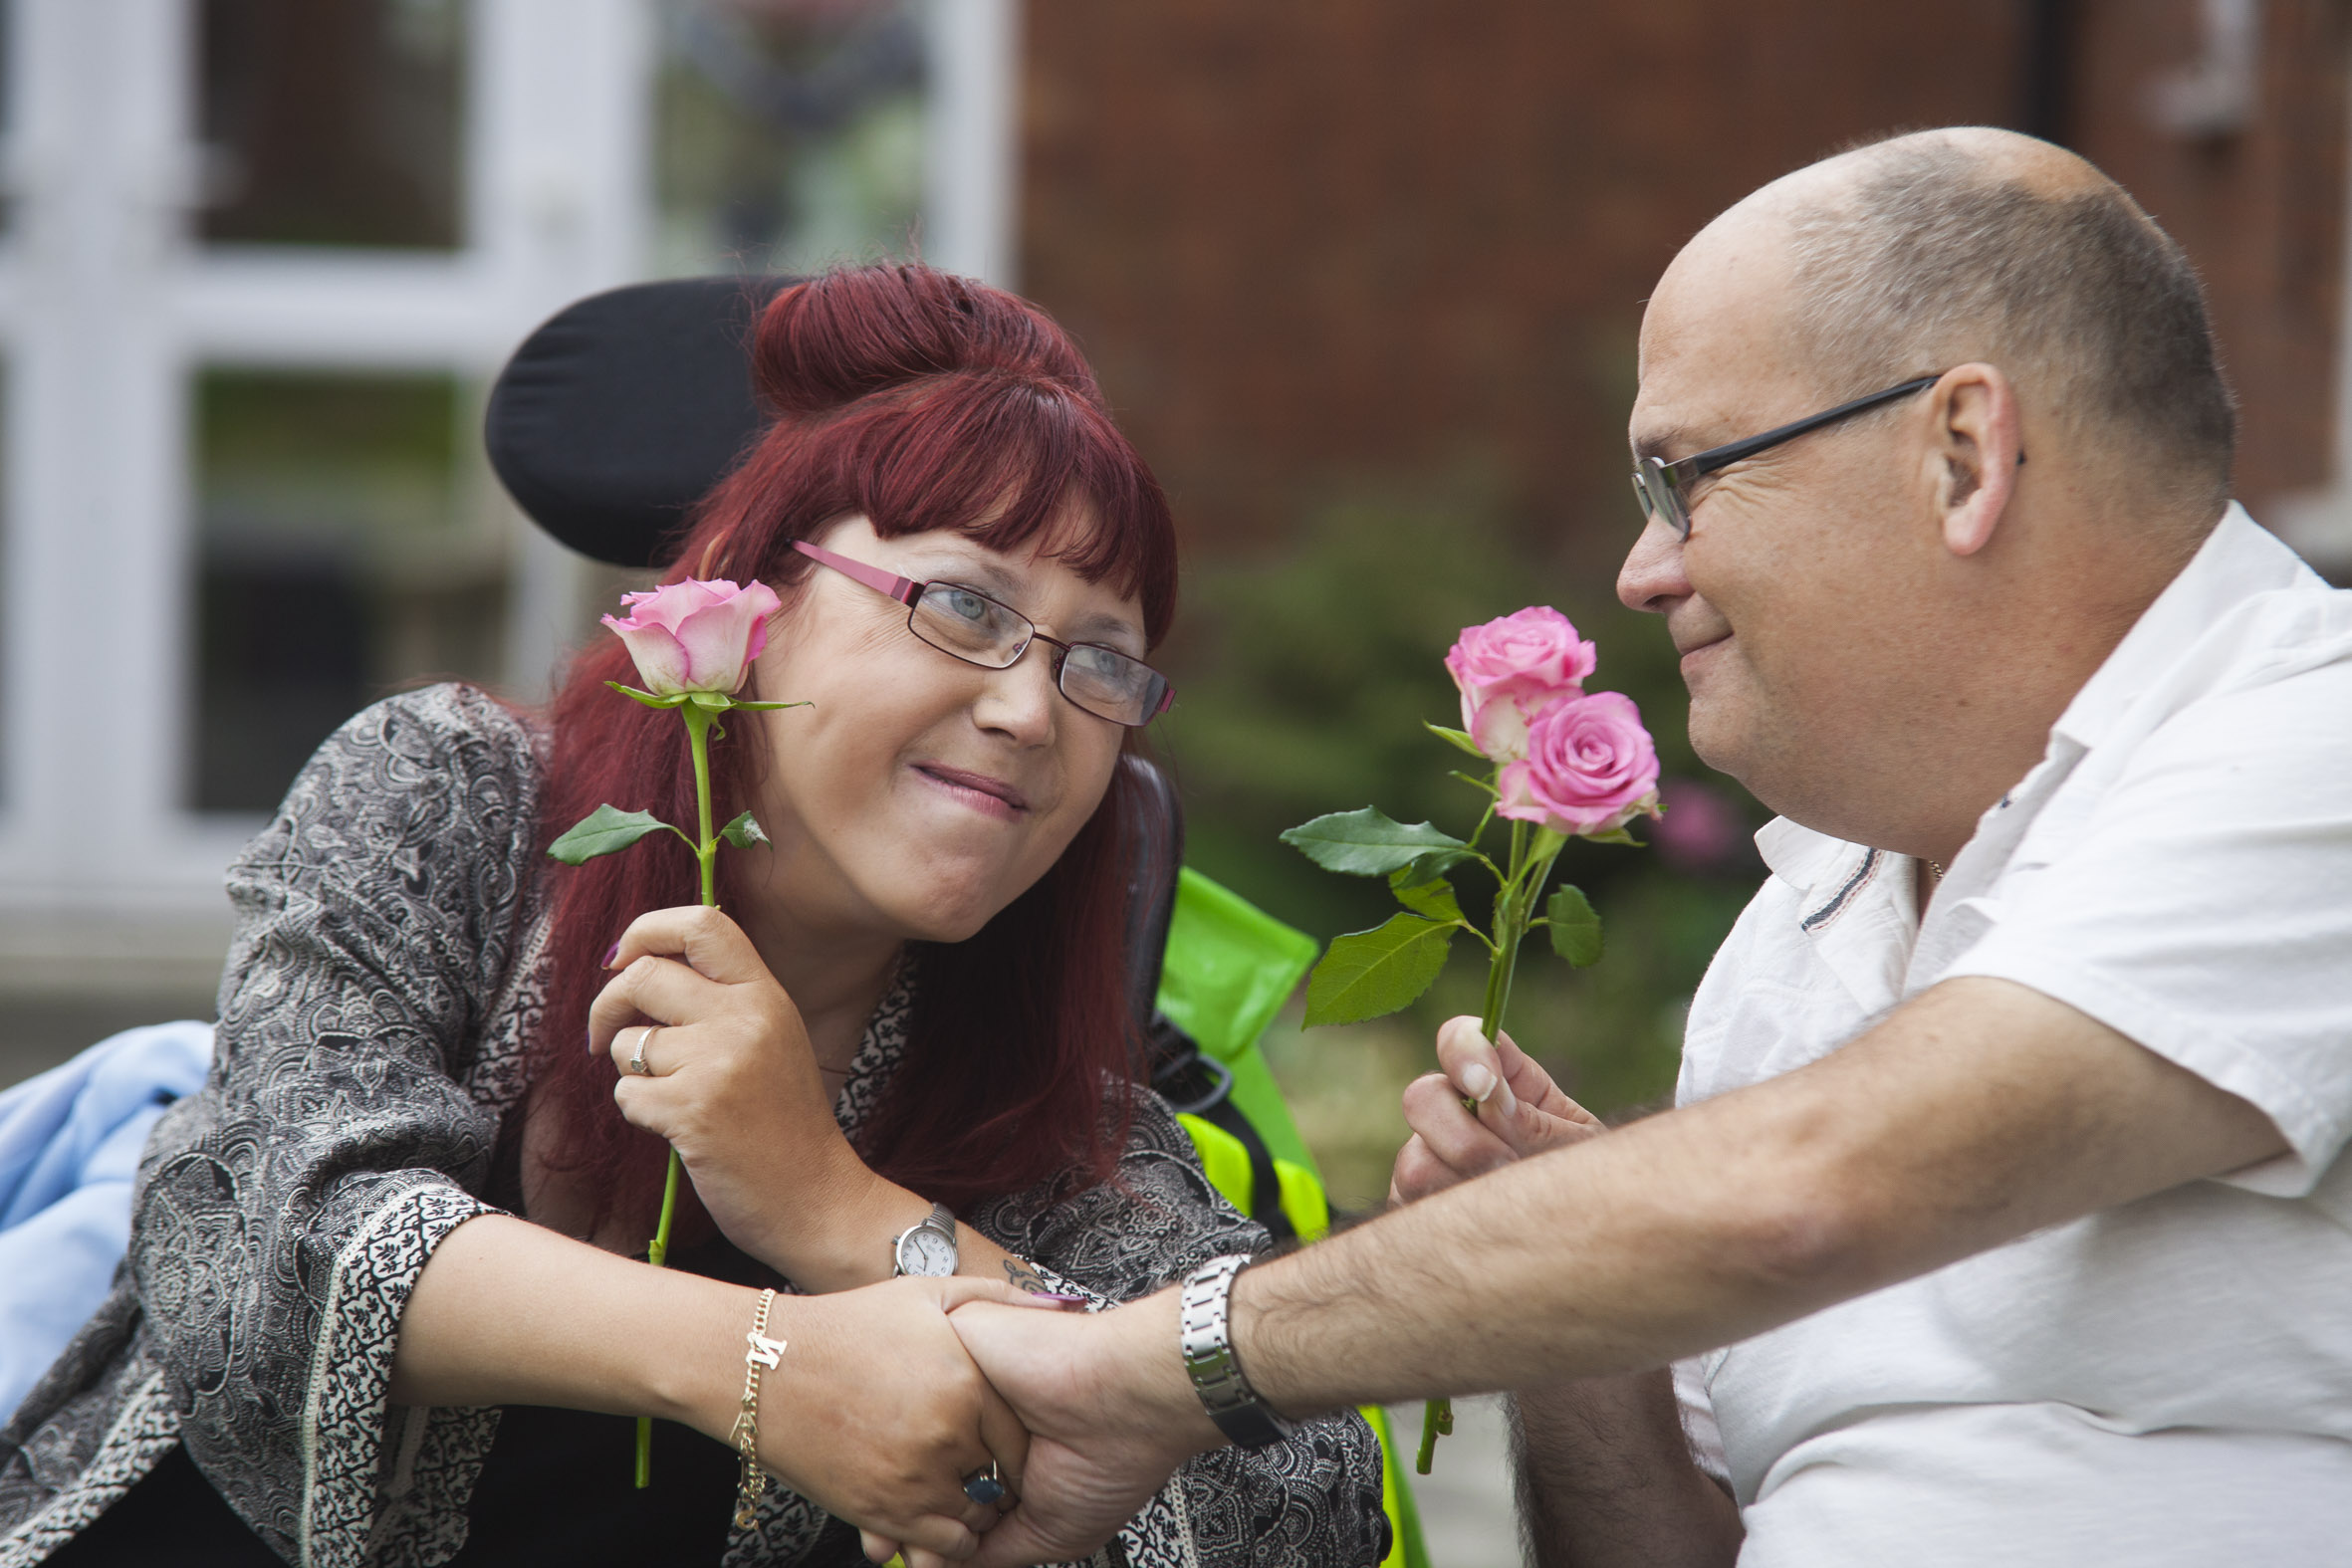 Care home love blossoms for devoted Sian and Steve